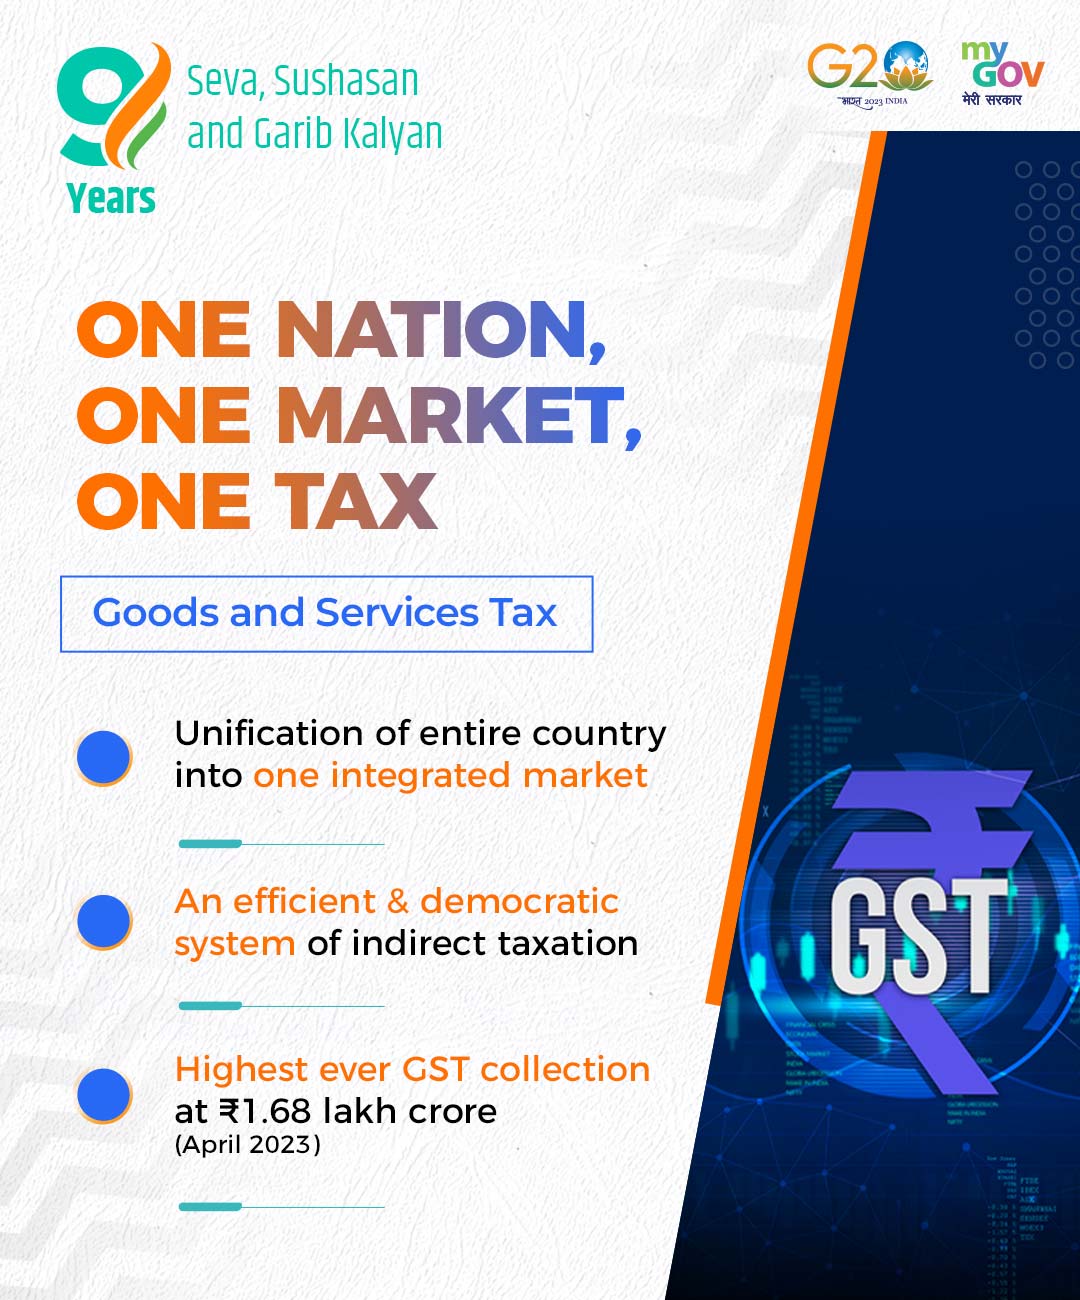 GST Slogan 'One Nation, One Tax, One Market' – Is it Suitable? - Banking  Finance - News, Articles, Statistics, Banking Exams, Banking Magazine